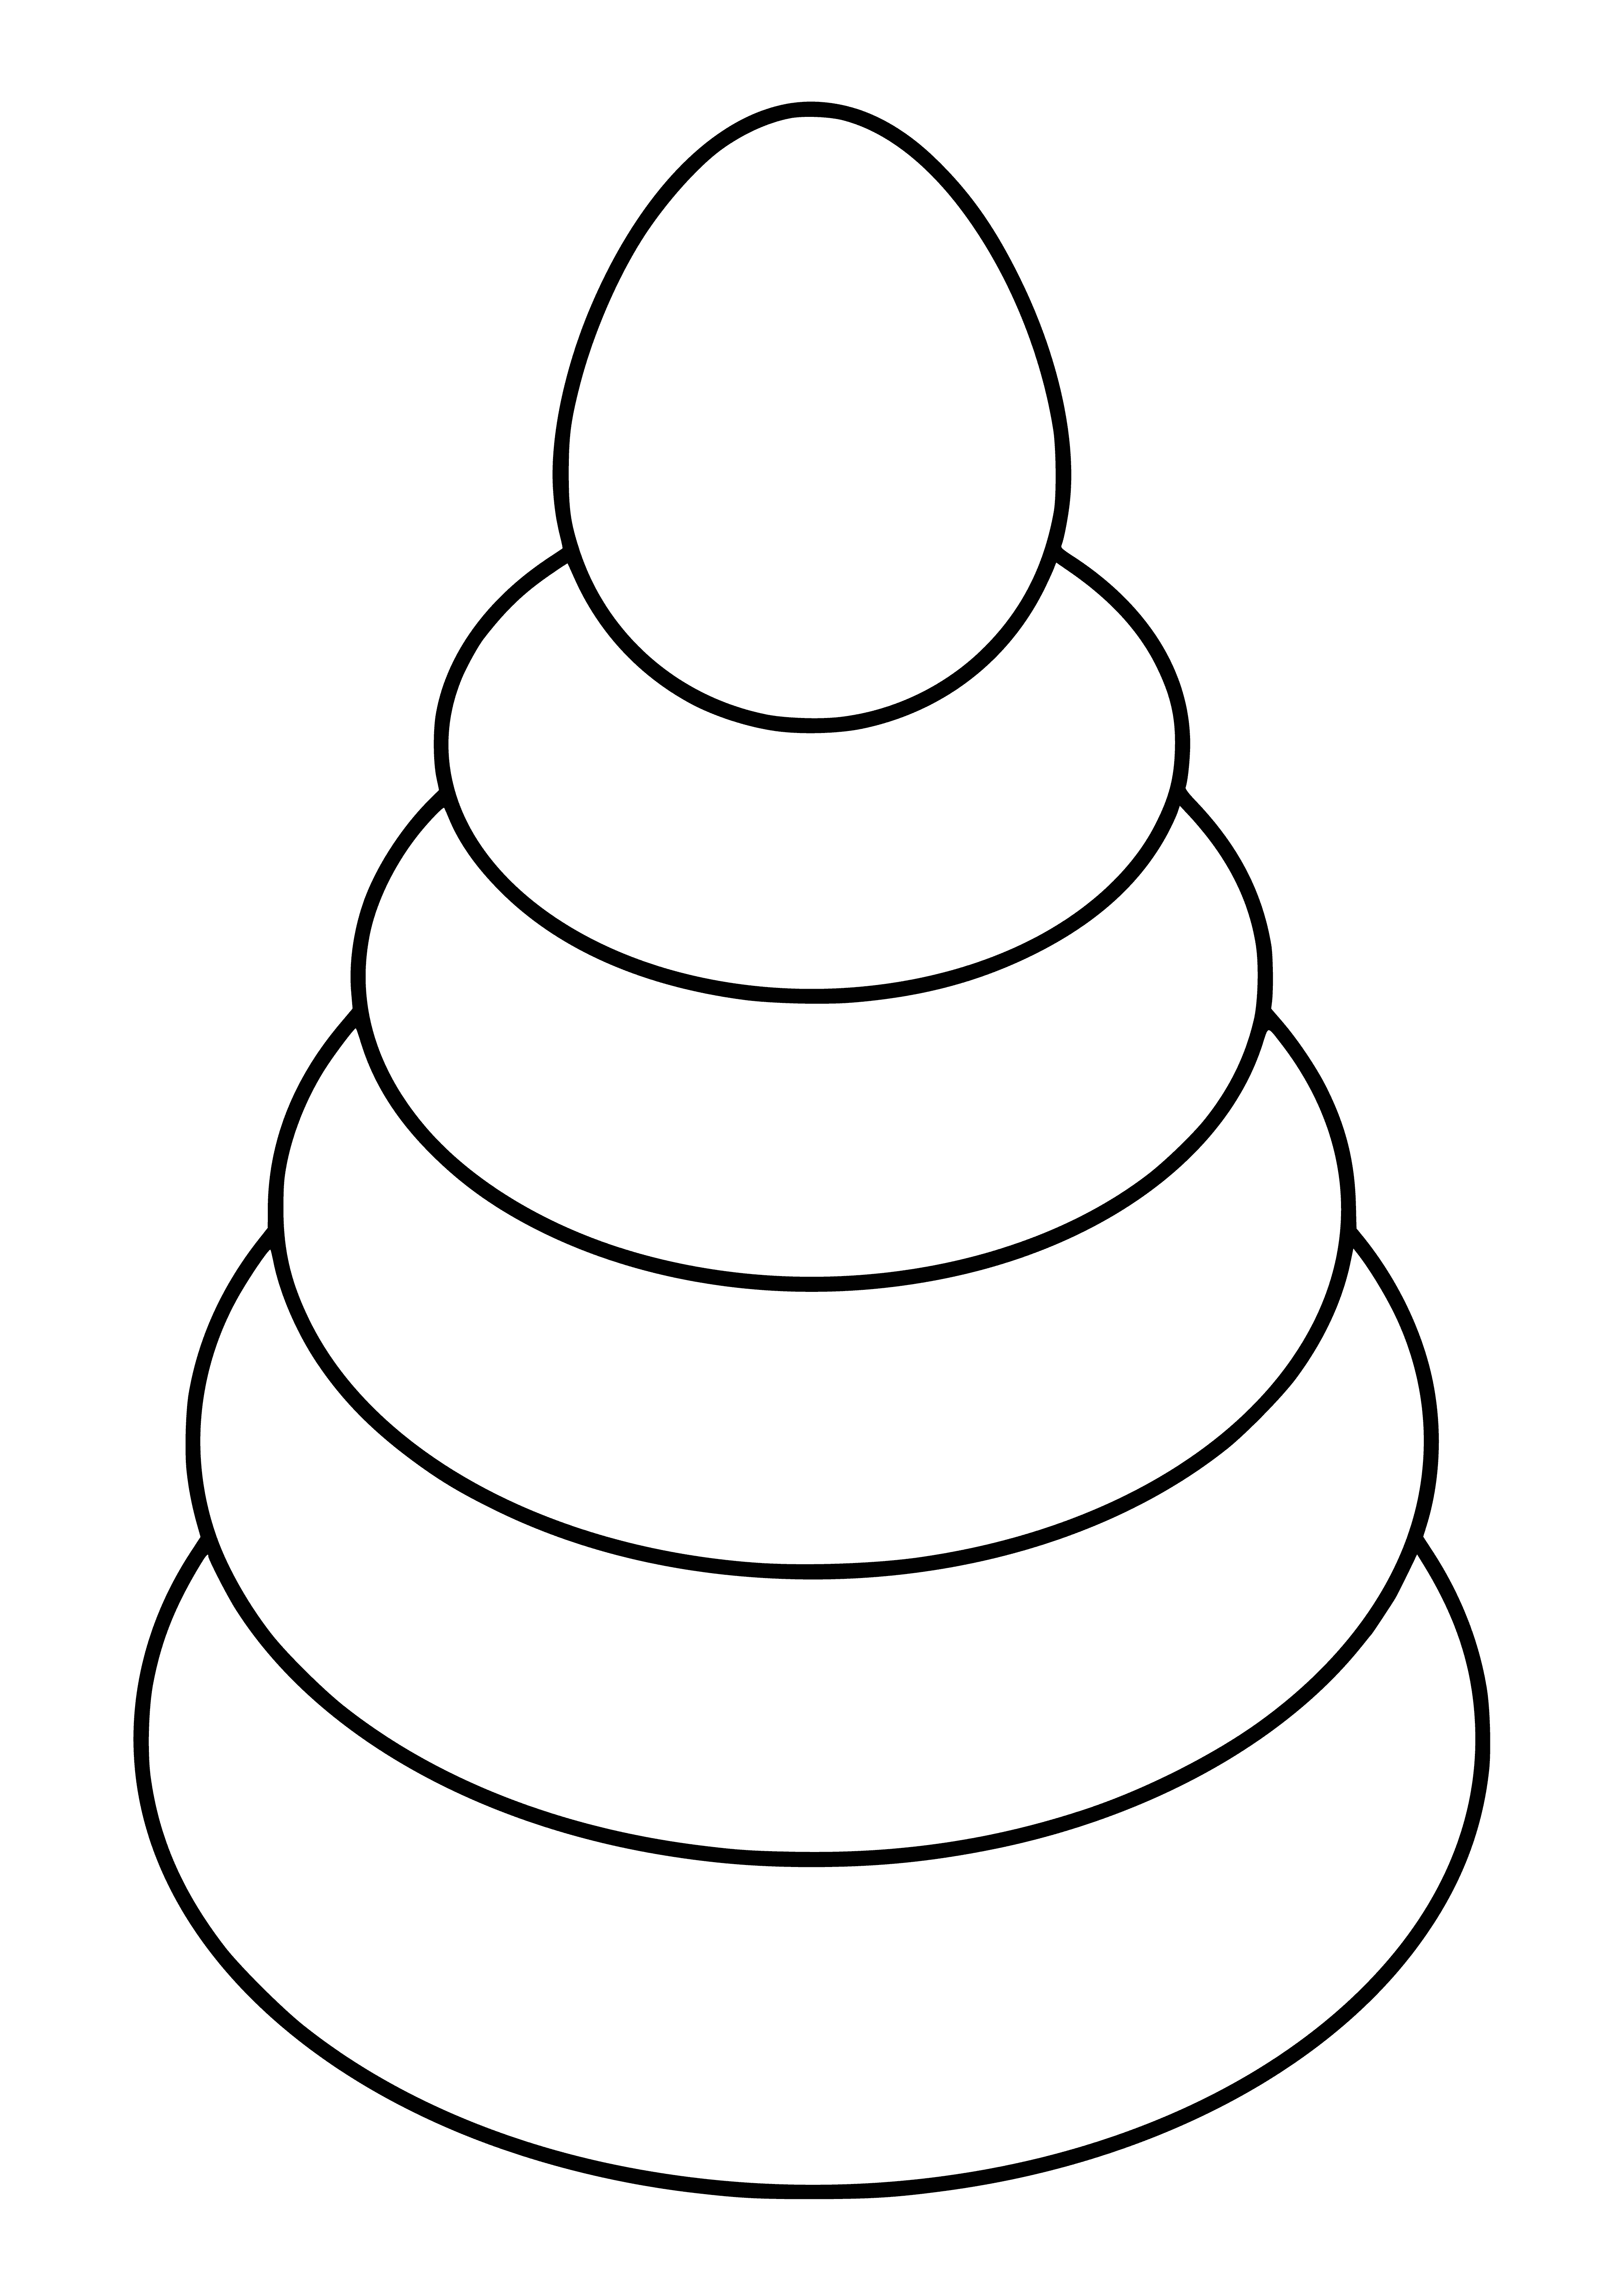 coloring page: Pyramid in center of page surrounded by smaller pyramids; light blue background.